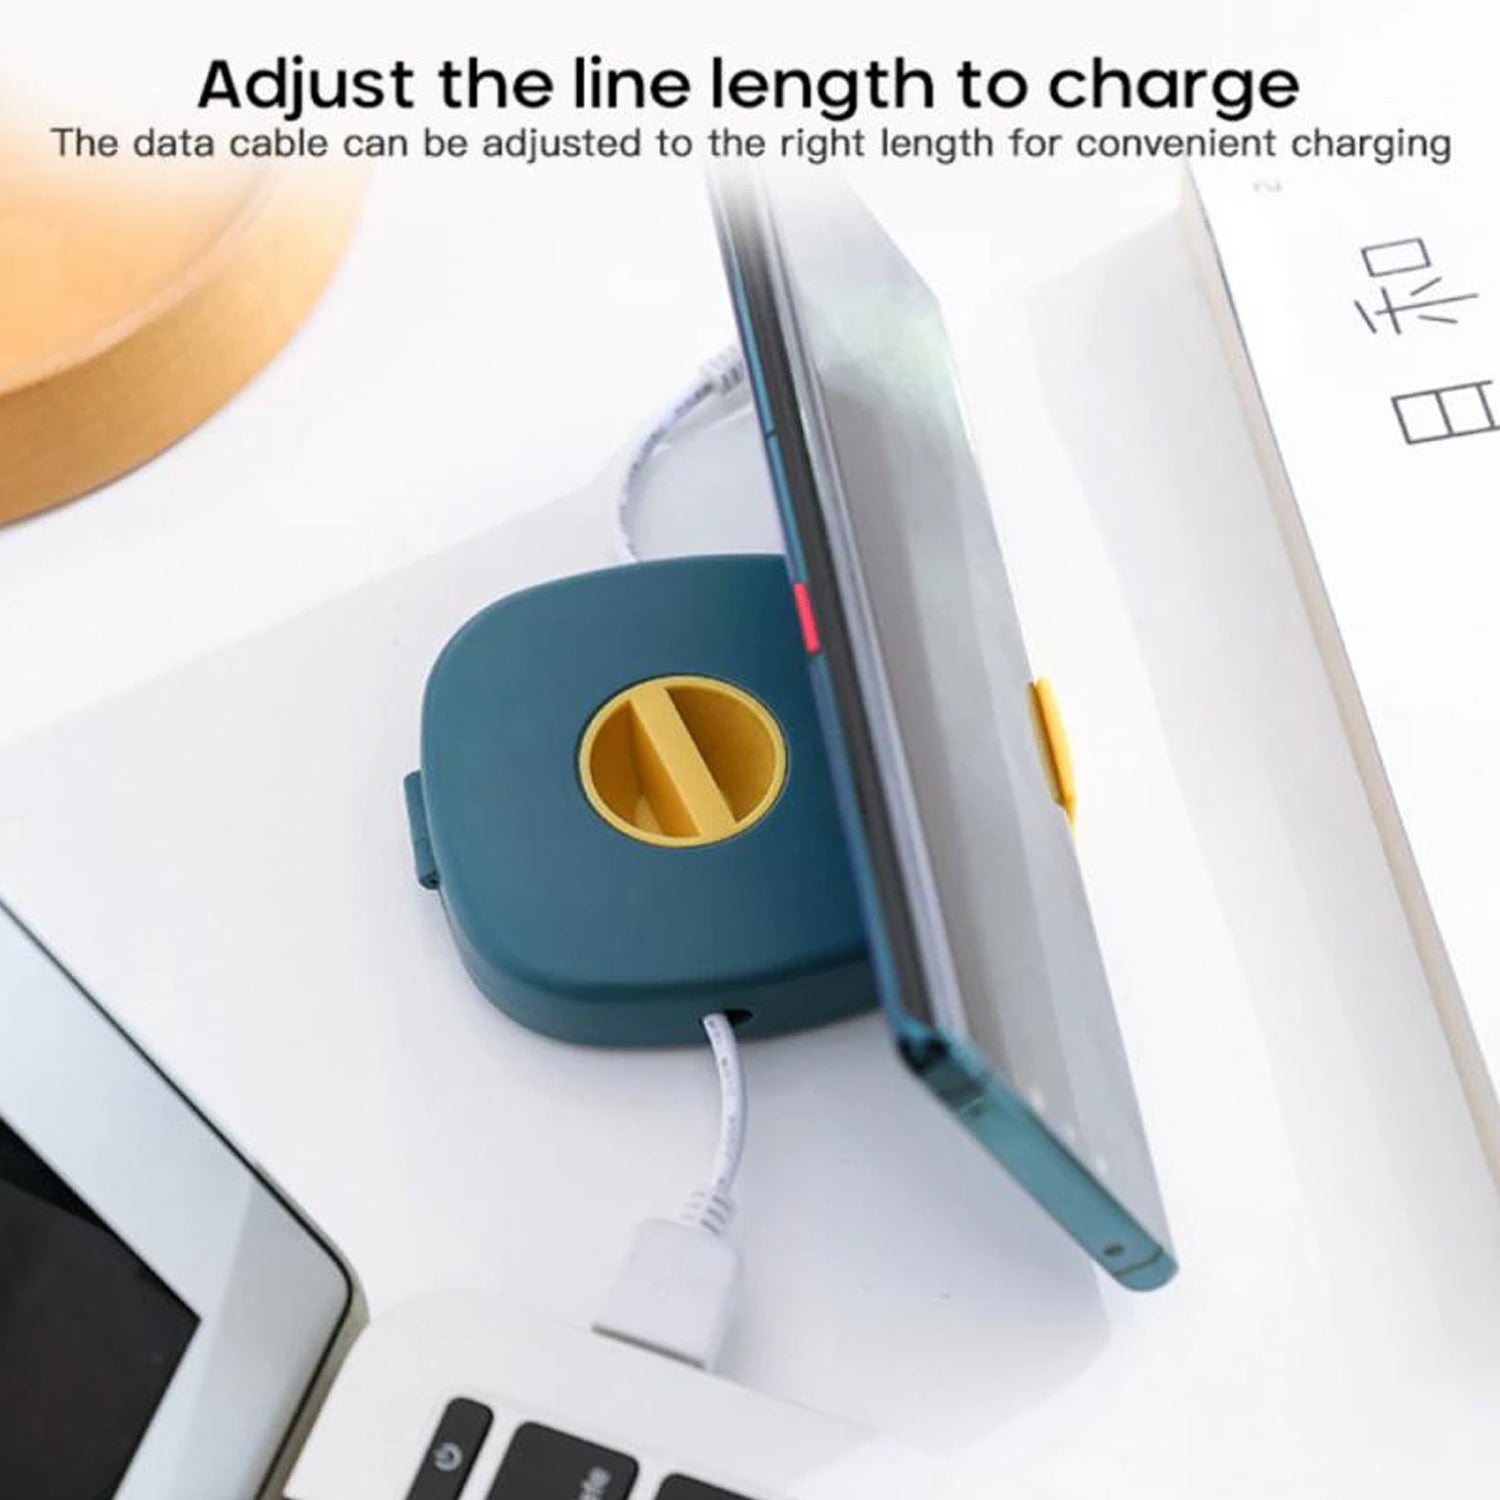 6184 Portable Cable Storage For Folding Of Usb Cables Easily And Can Travel With Them Easily. DeoDap